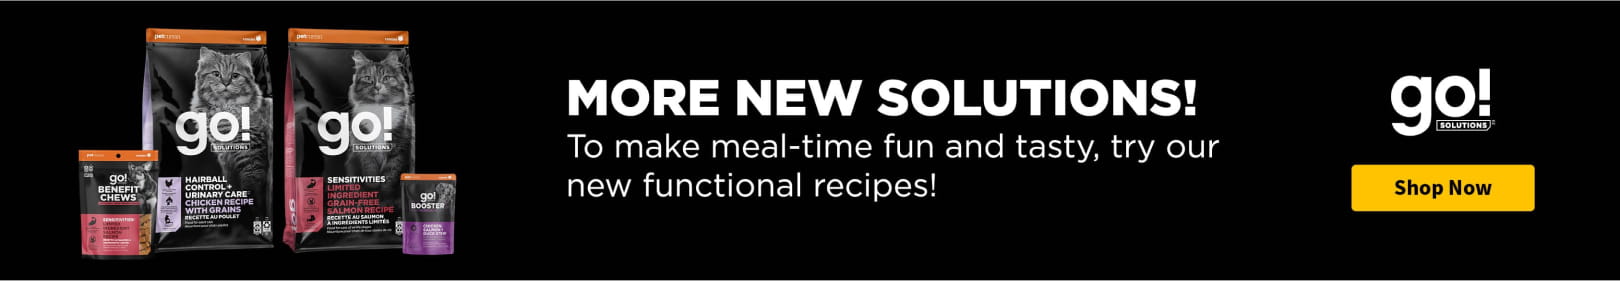 Go! Solutions. More New Solutions! To make meal-time fun and tasty, try our new functional recipes! Shop Now